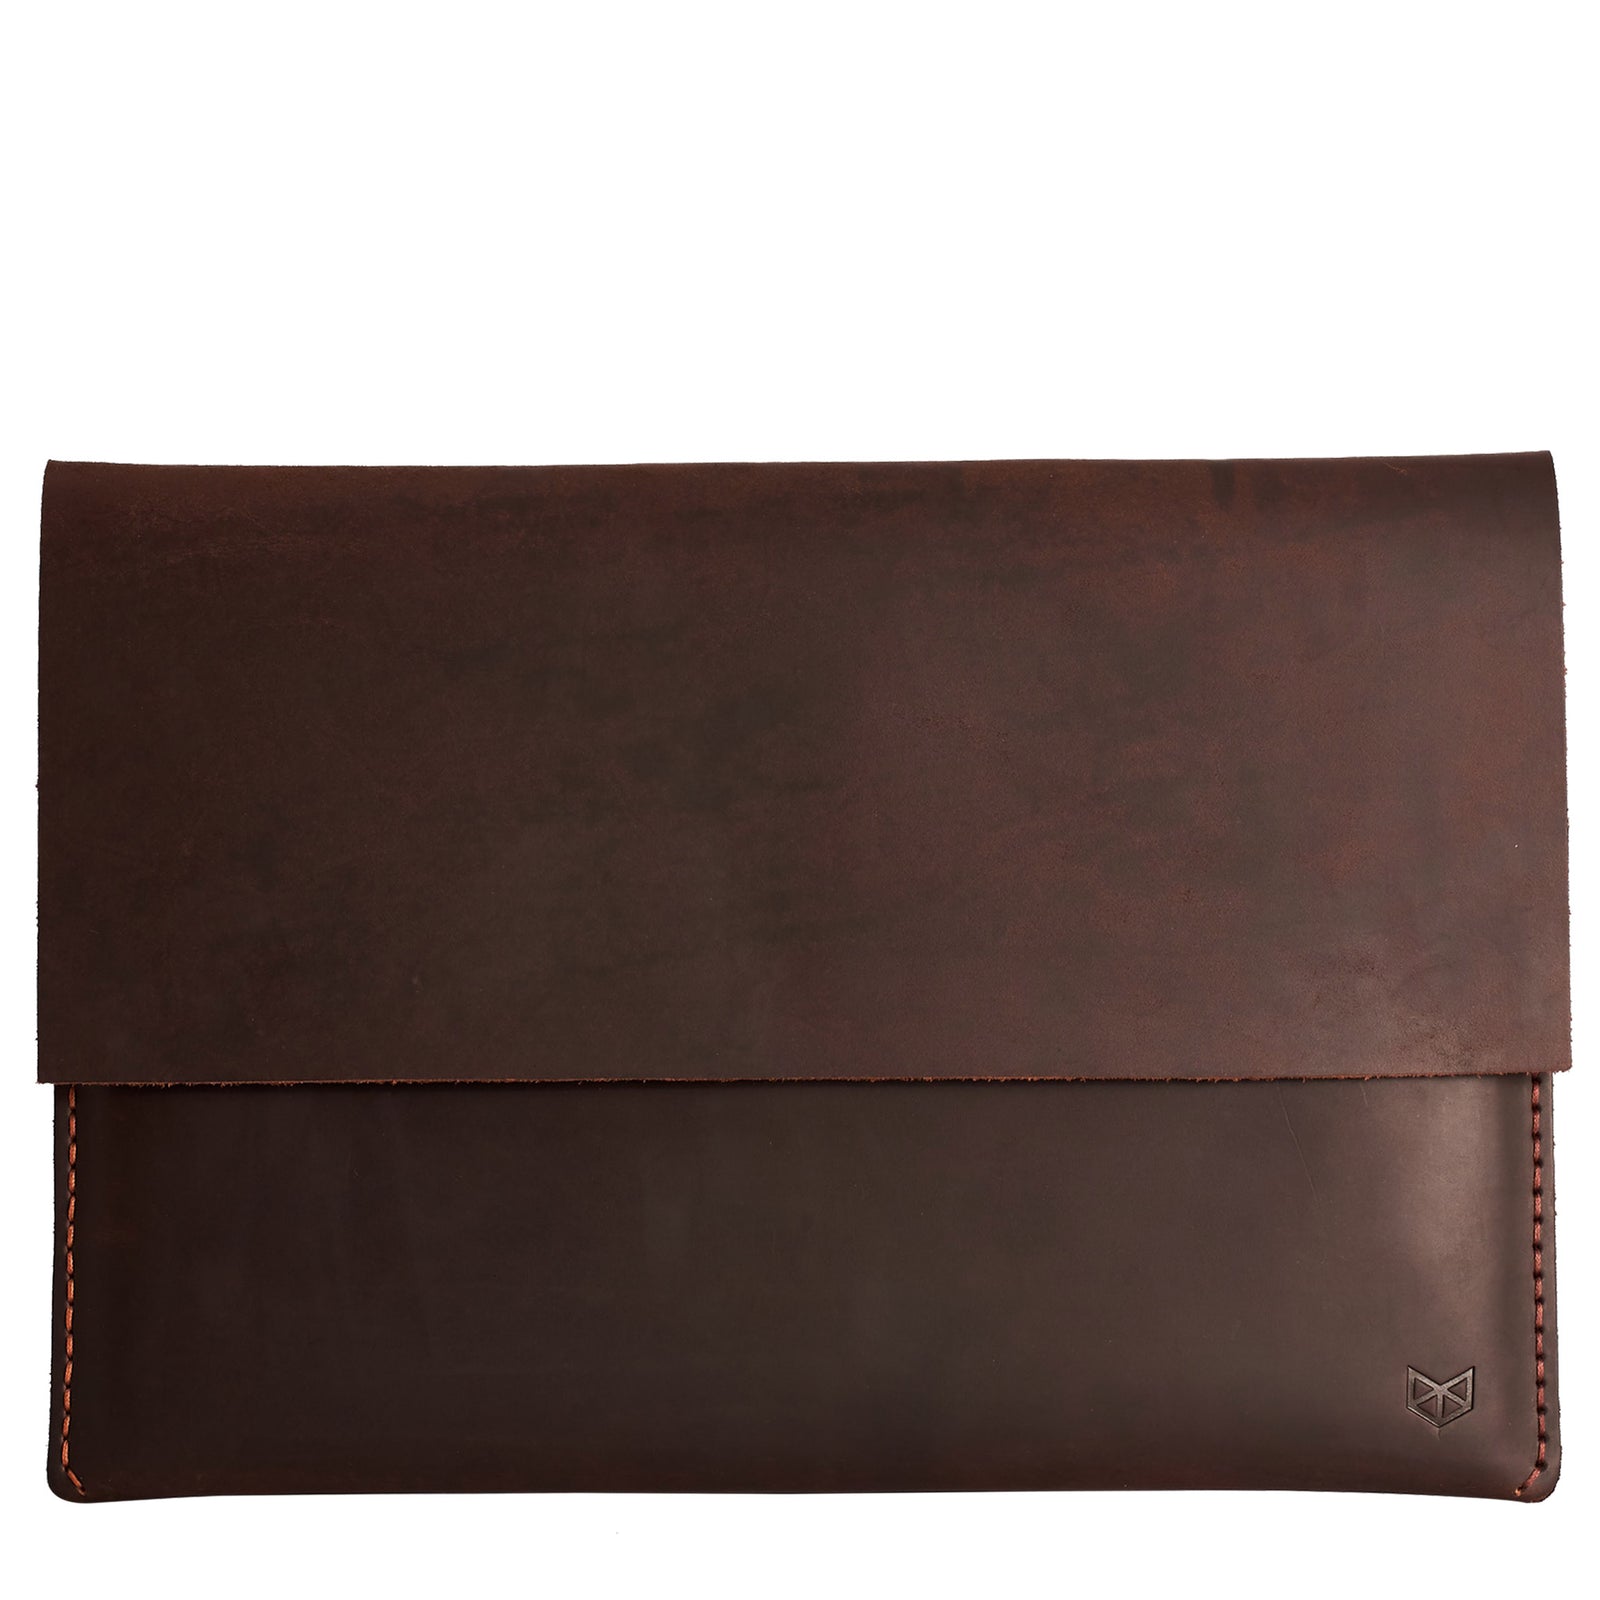 Genuine Leather Laptop Sleeve, MacBook Case, Tablet Cover, Wild